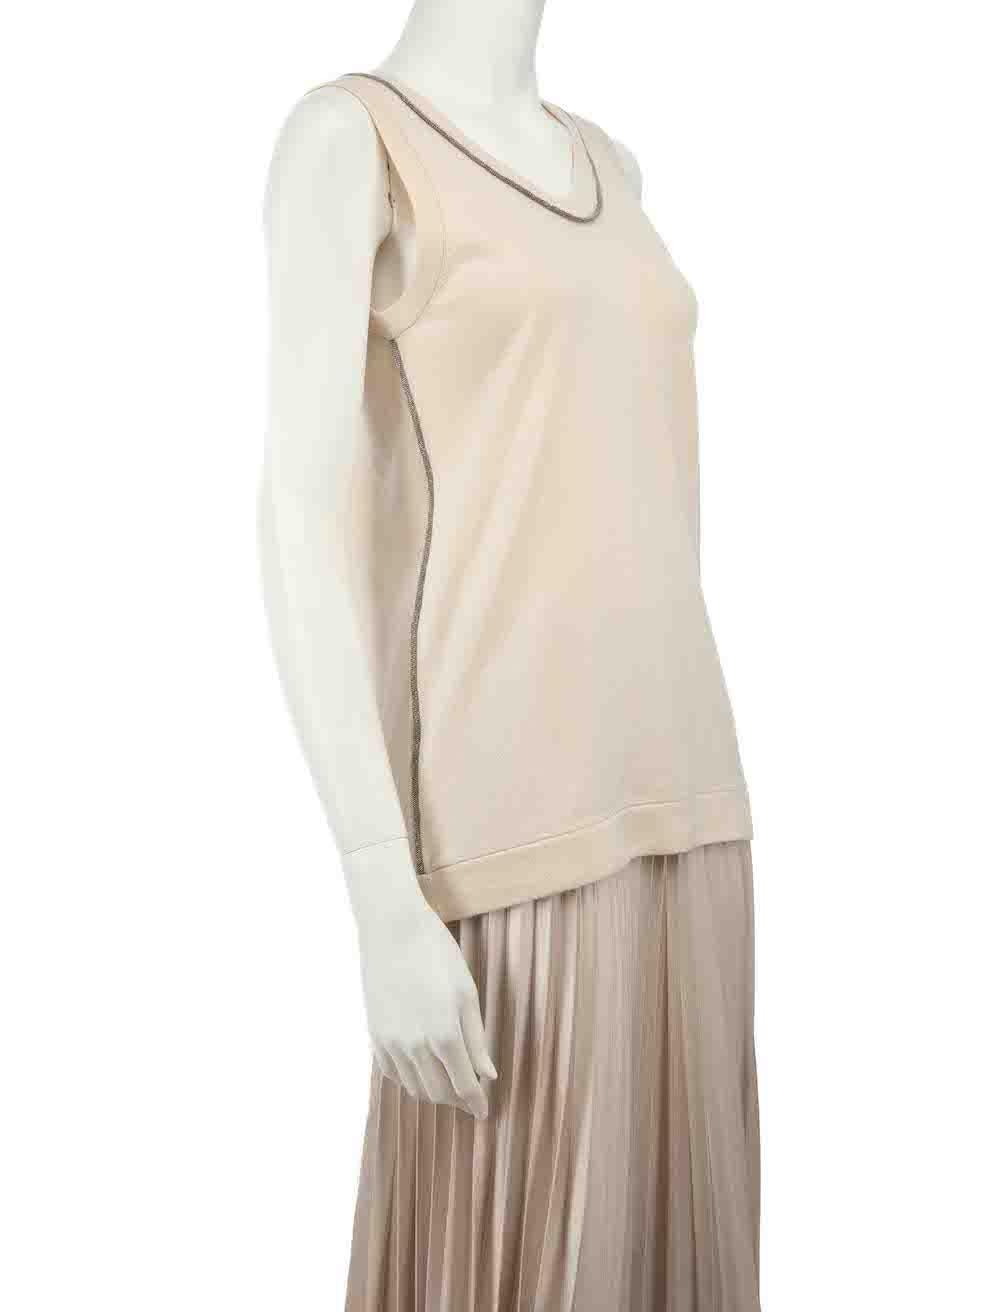 CONDITION is Very good. Minimal wear to top is evident. Minimal wear to the composition label at the lining that has come detached at one side on this used Brunello Cucinelli designer resale item.
 
 
 
 Details
 
 
 Cream
 
 Cashmere
 
 Knitted and